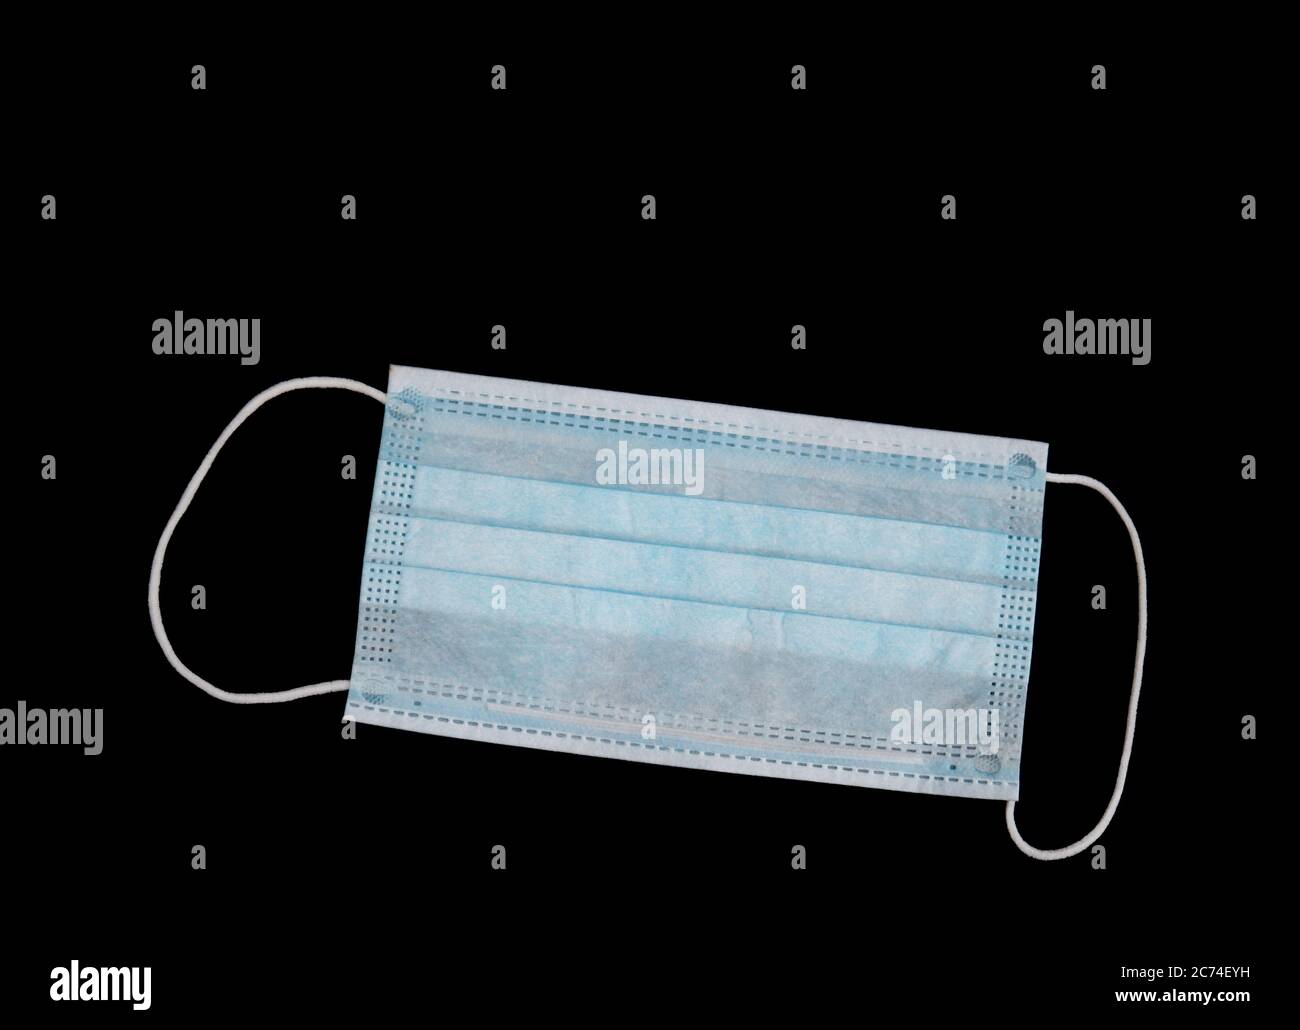 Single use Covid19 use surgical mask isolated on black with copyspace for your comment. Stock Photo